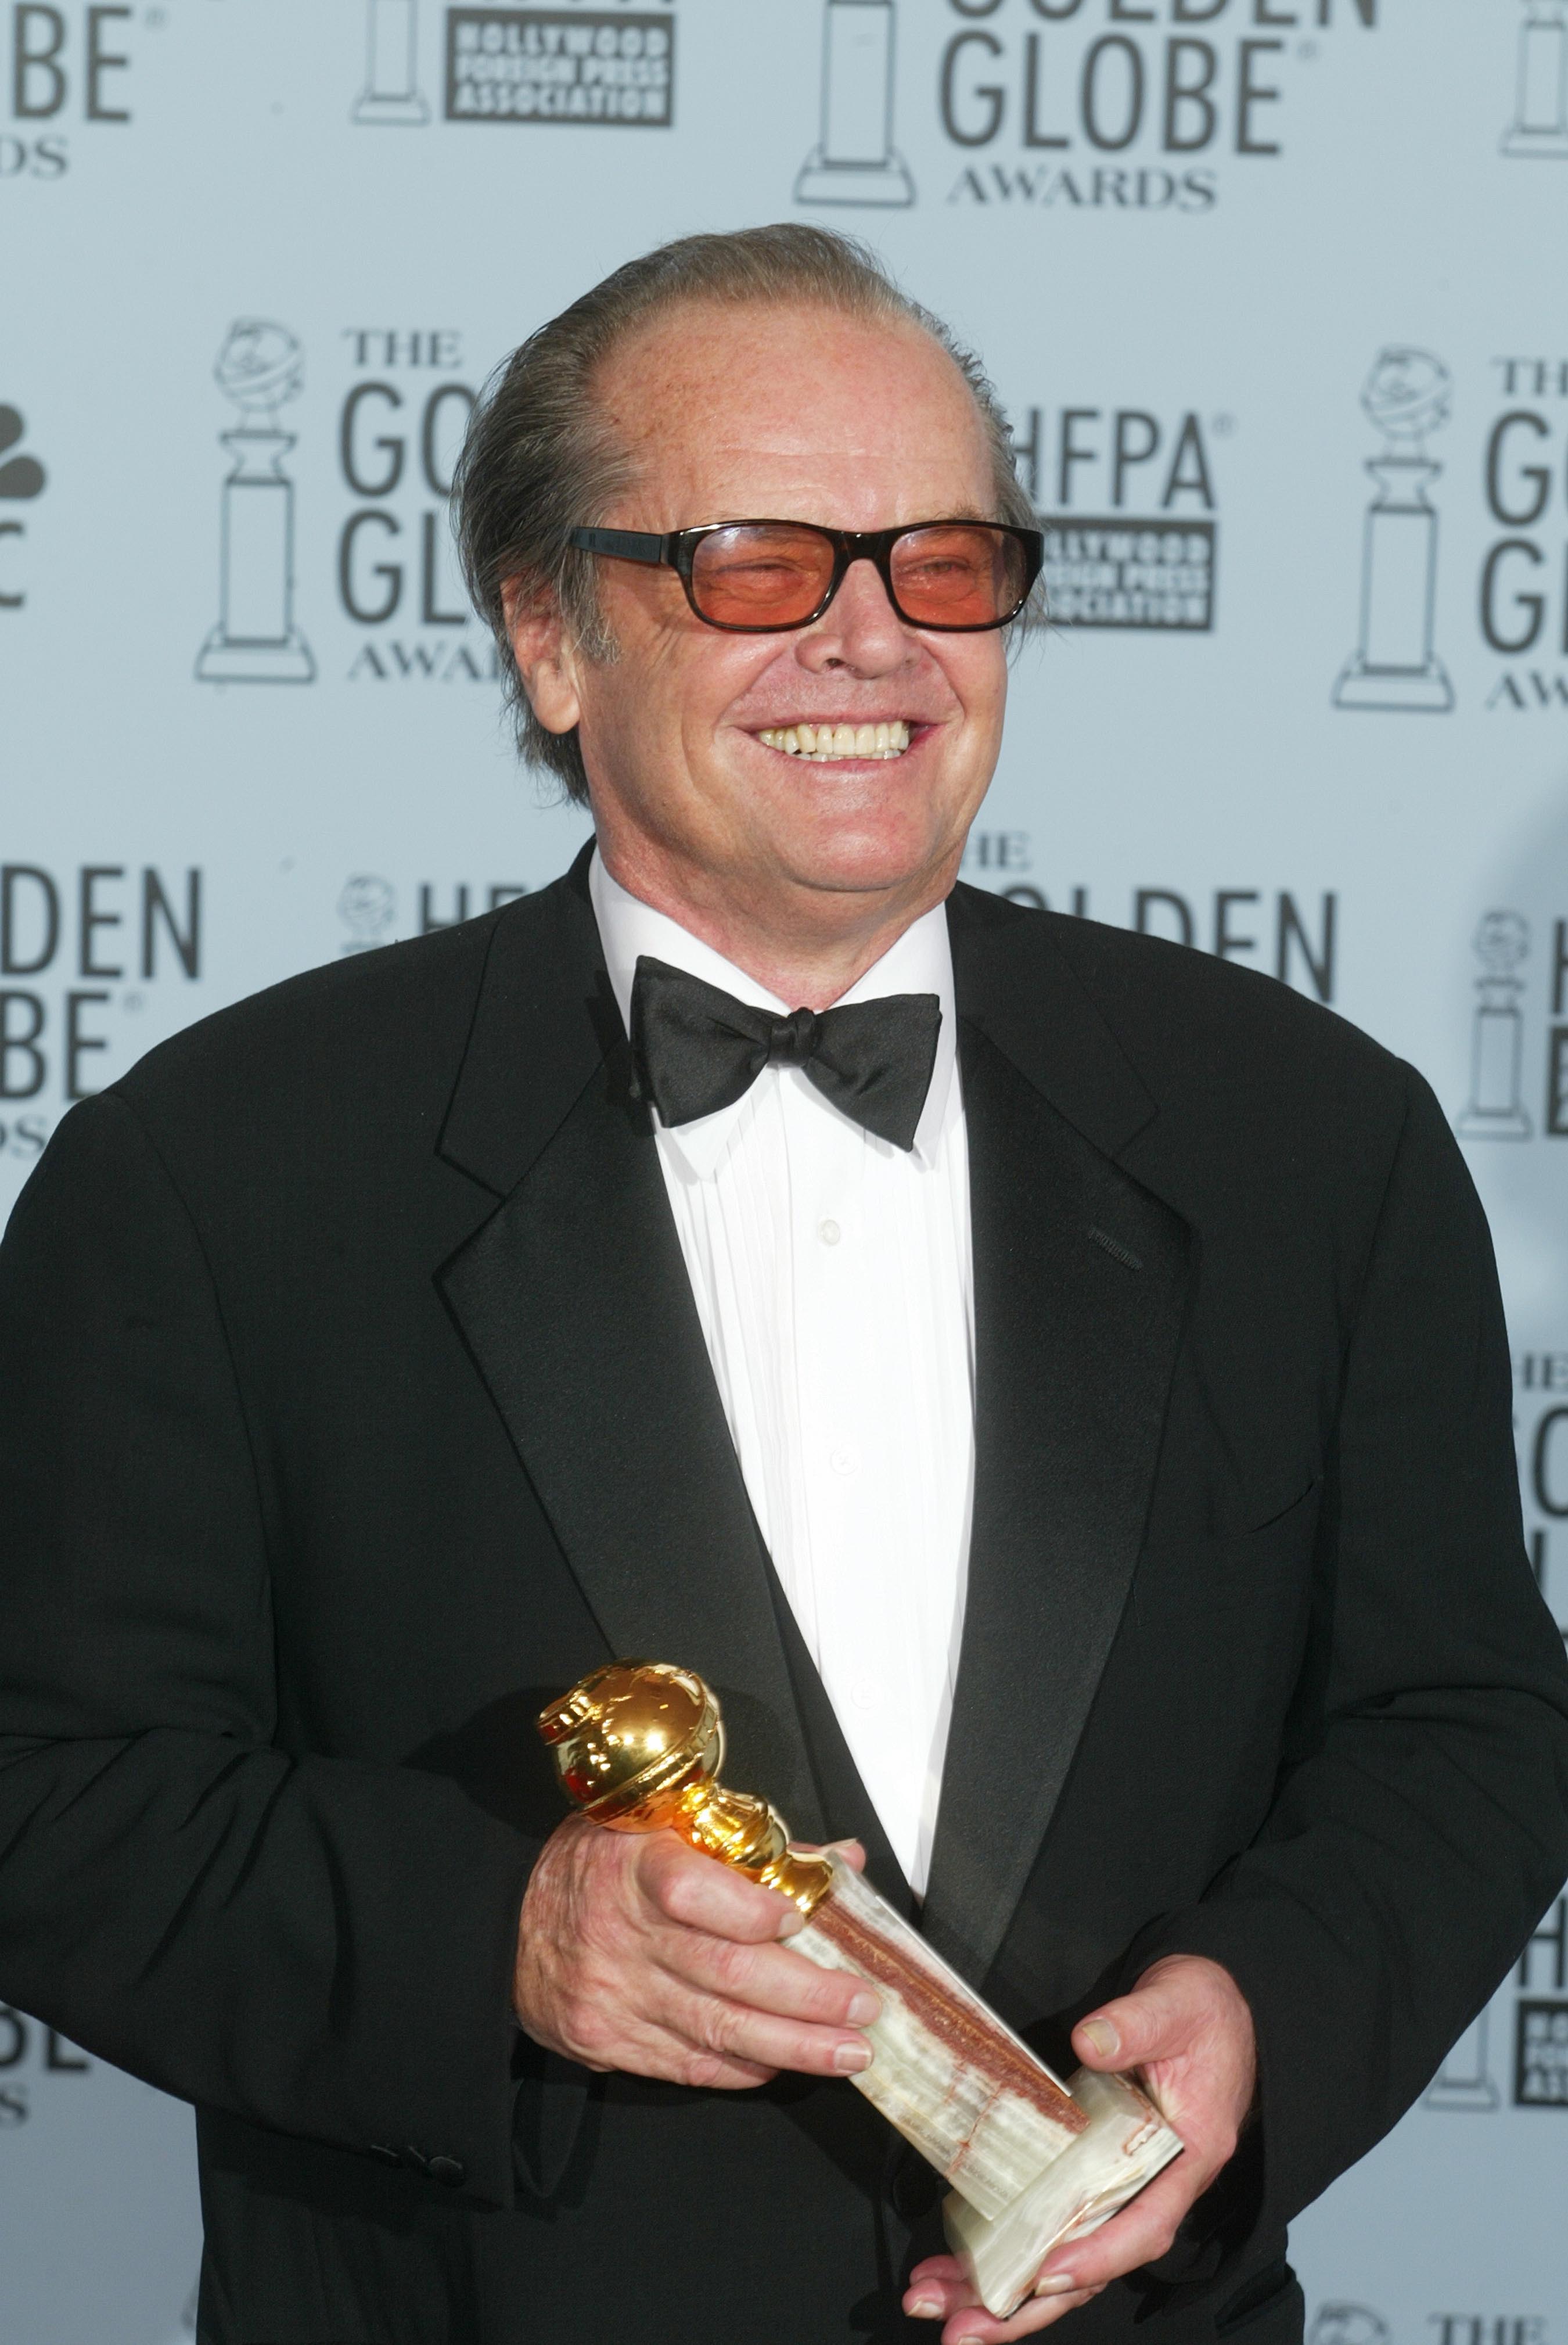 Jack Nicholson, winner of the award for Best Performance by An Actor In A Motion Picture - Drama, at the 60th Annual Golden Globe Awards at Beverly Hilton Hotel in Beverly Hills, California on January 19, 2003. | Source: Getty Images.